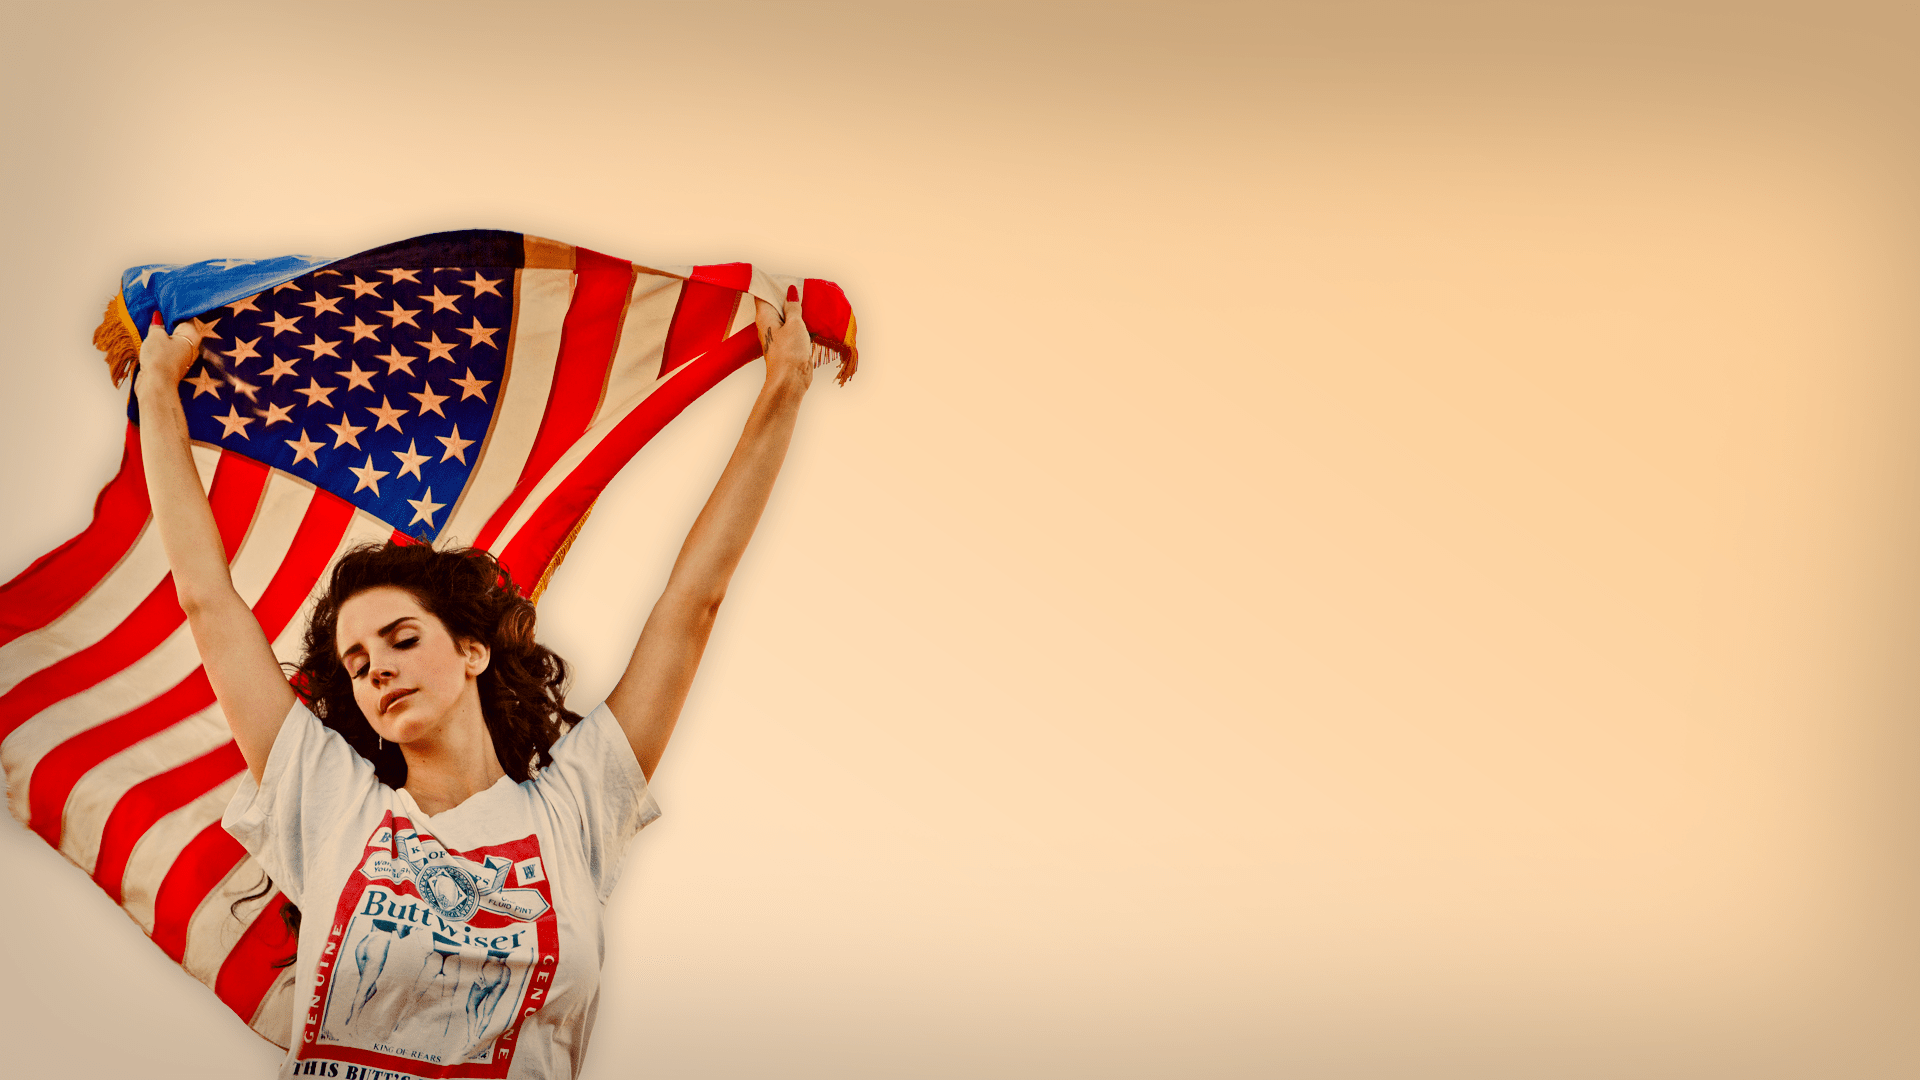 A woman with a flag in front of a white background - Lana Del Rey